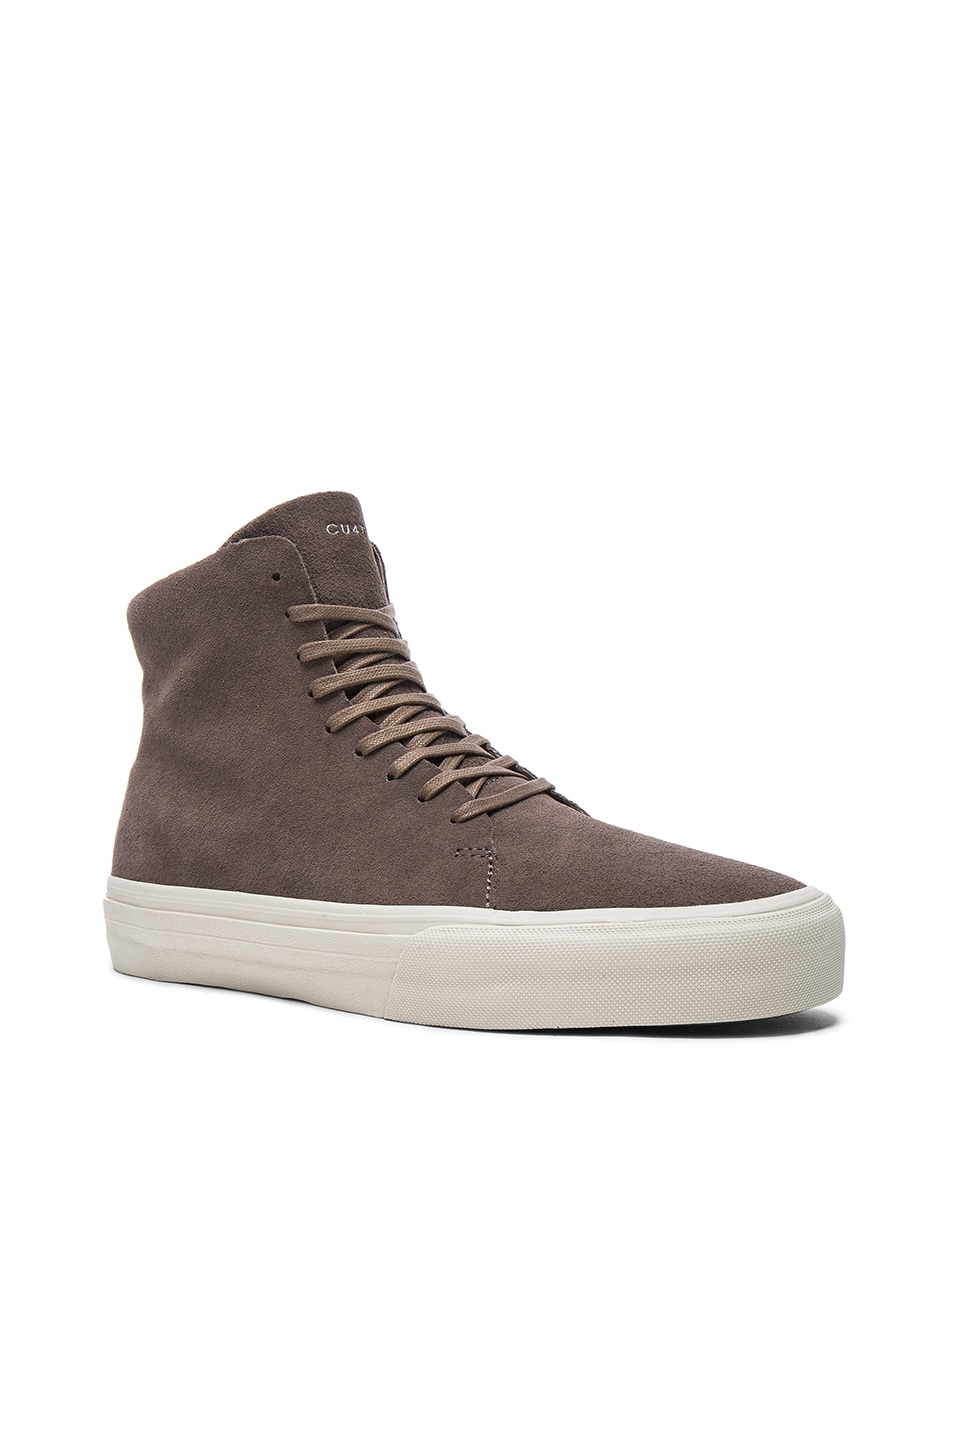 Image 1 of CU4TRO Suede Norris Sneakers in Taupe